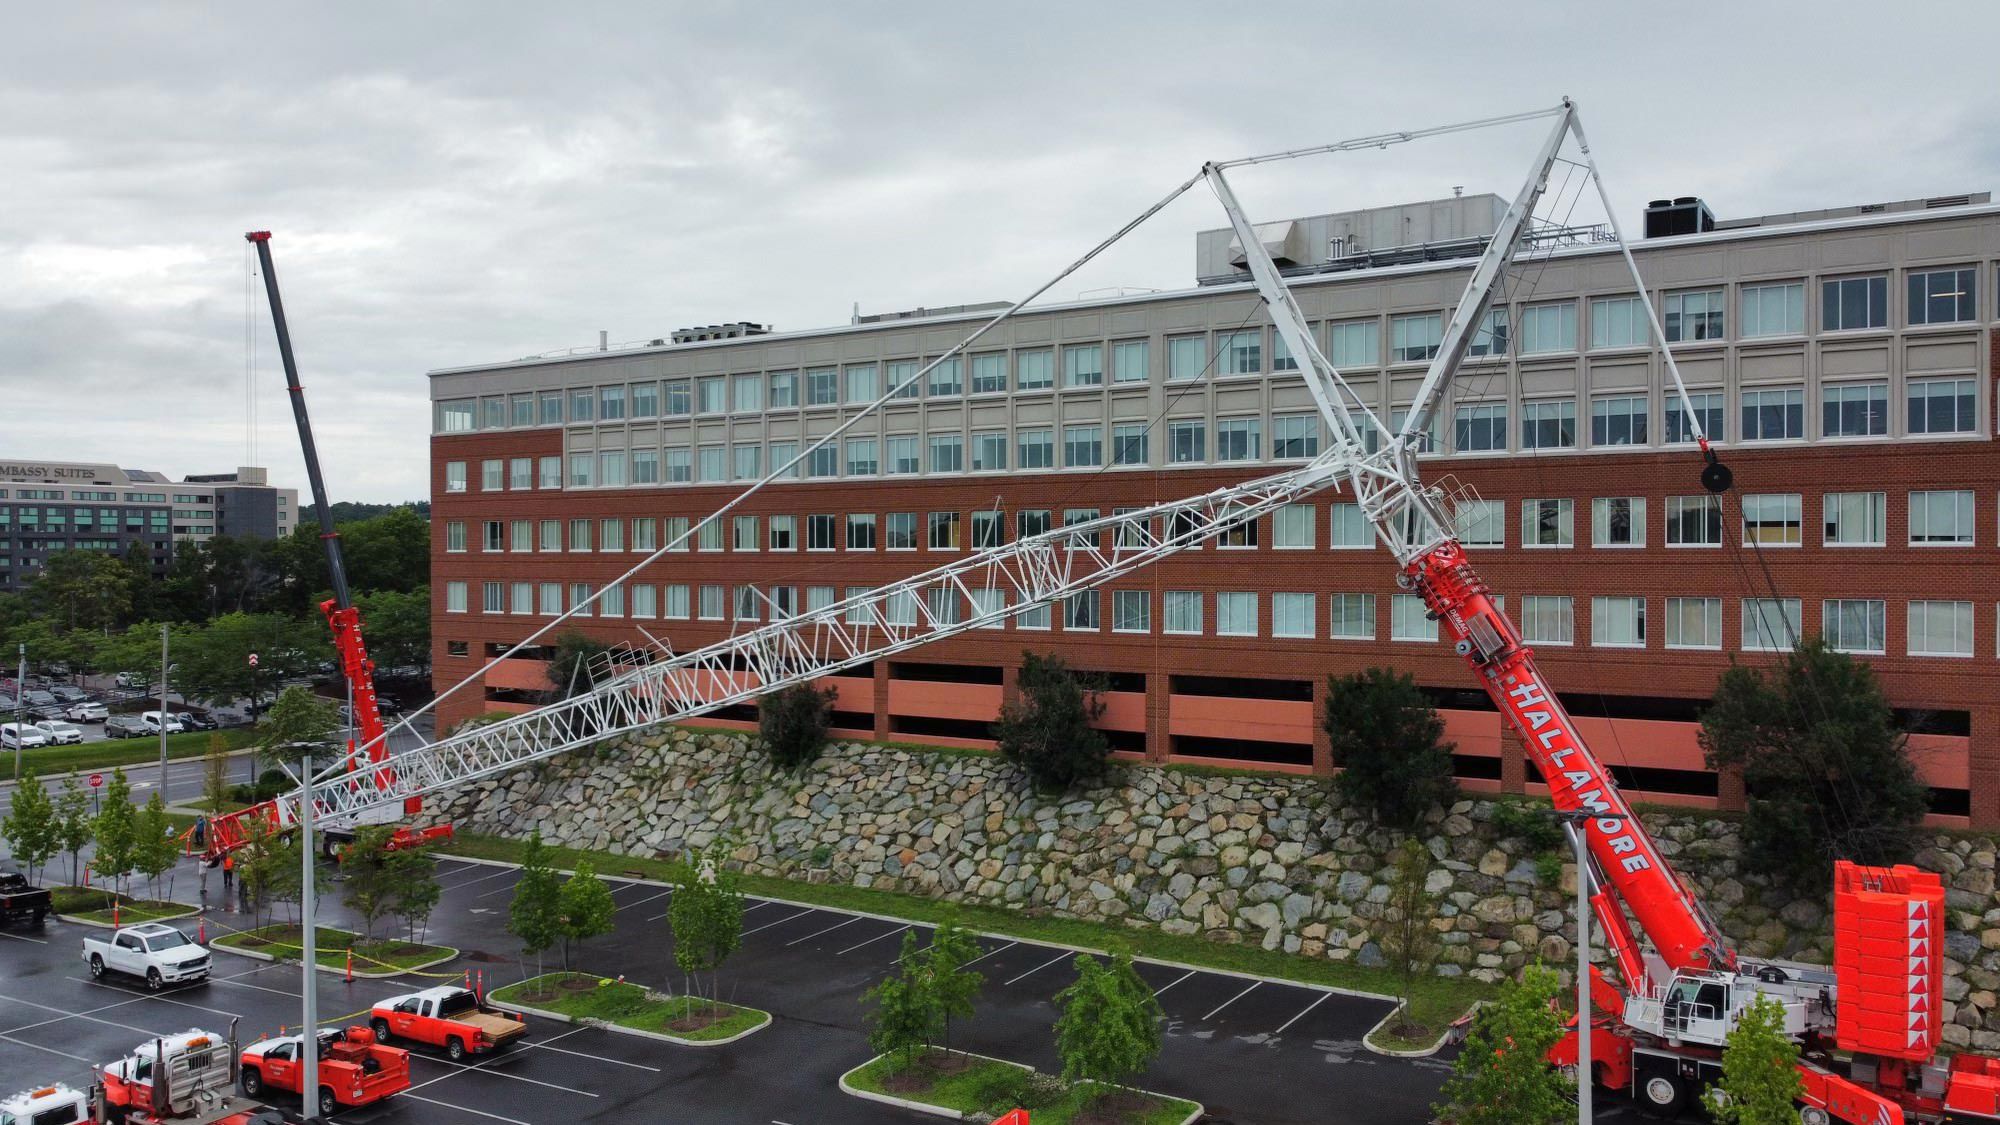 Hallamore Corporation offers commercial crane and rigging services.